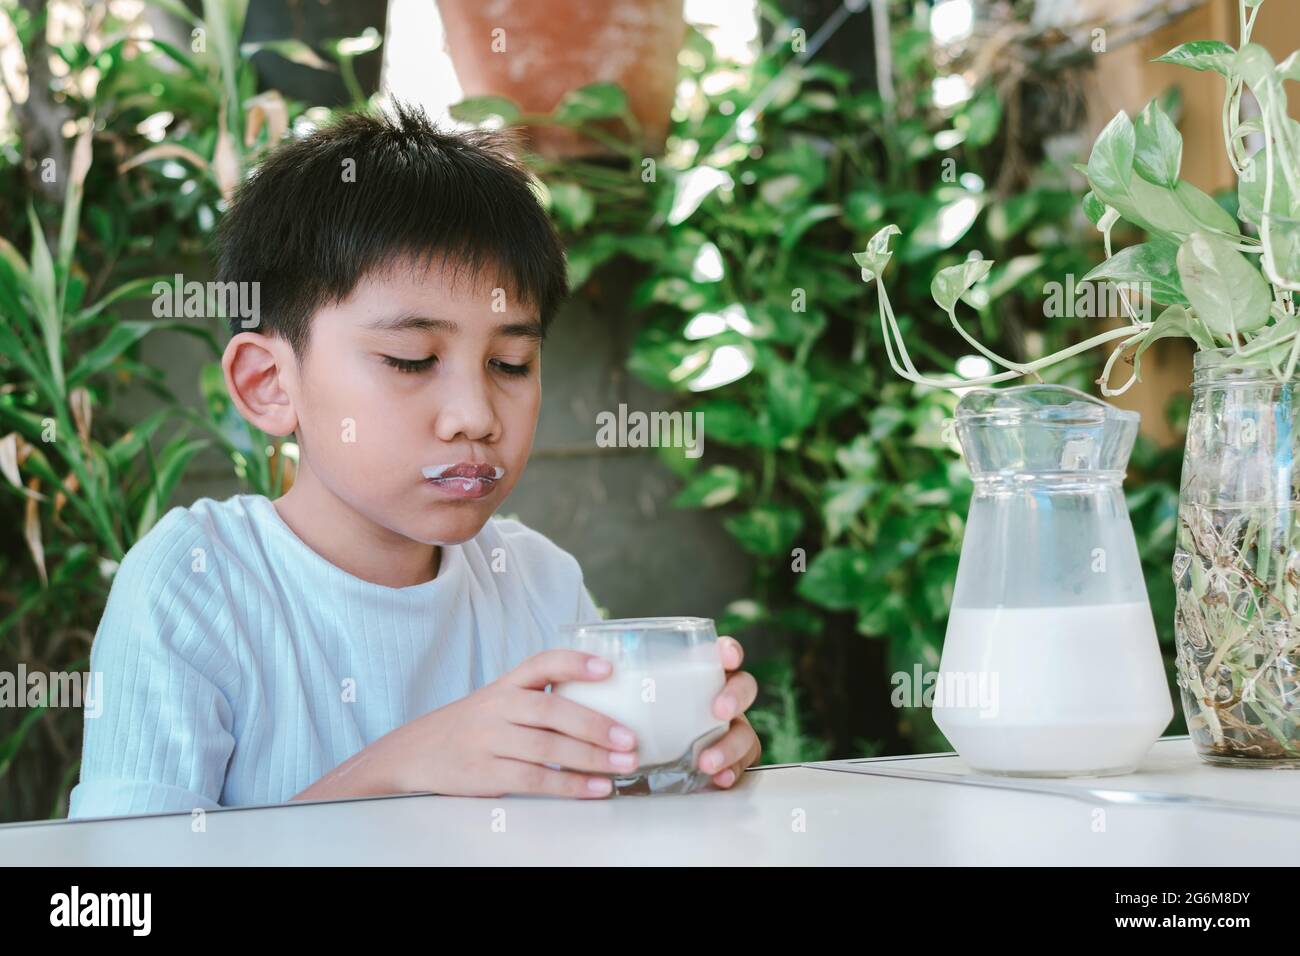 The boy's mouth was stained with milk stains after he drank the milk from the glass. Stock Photo